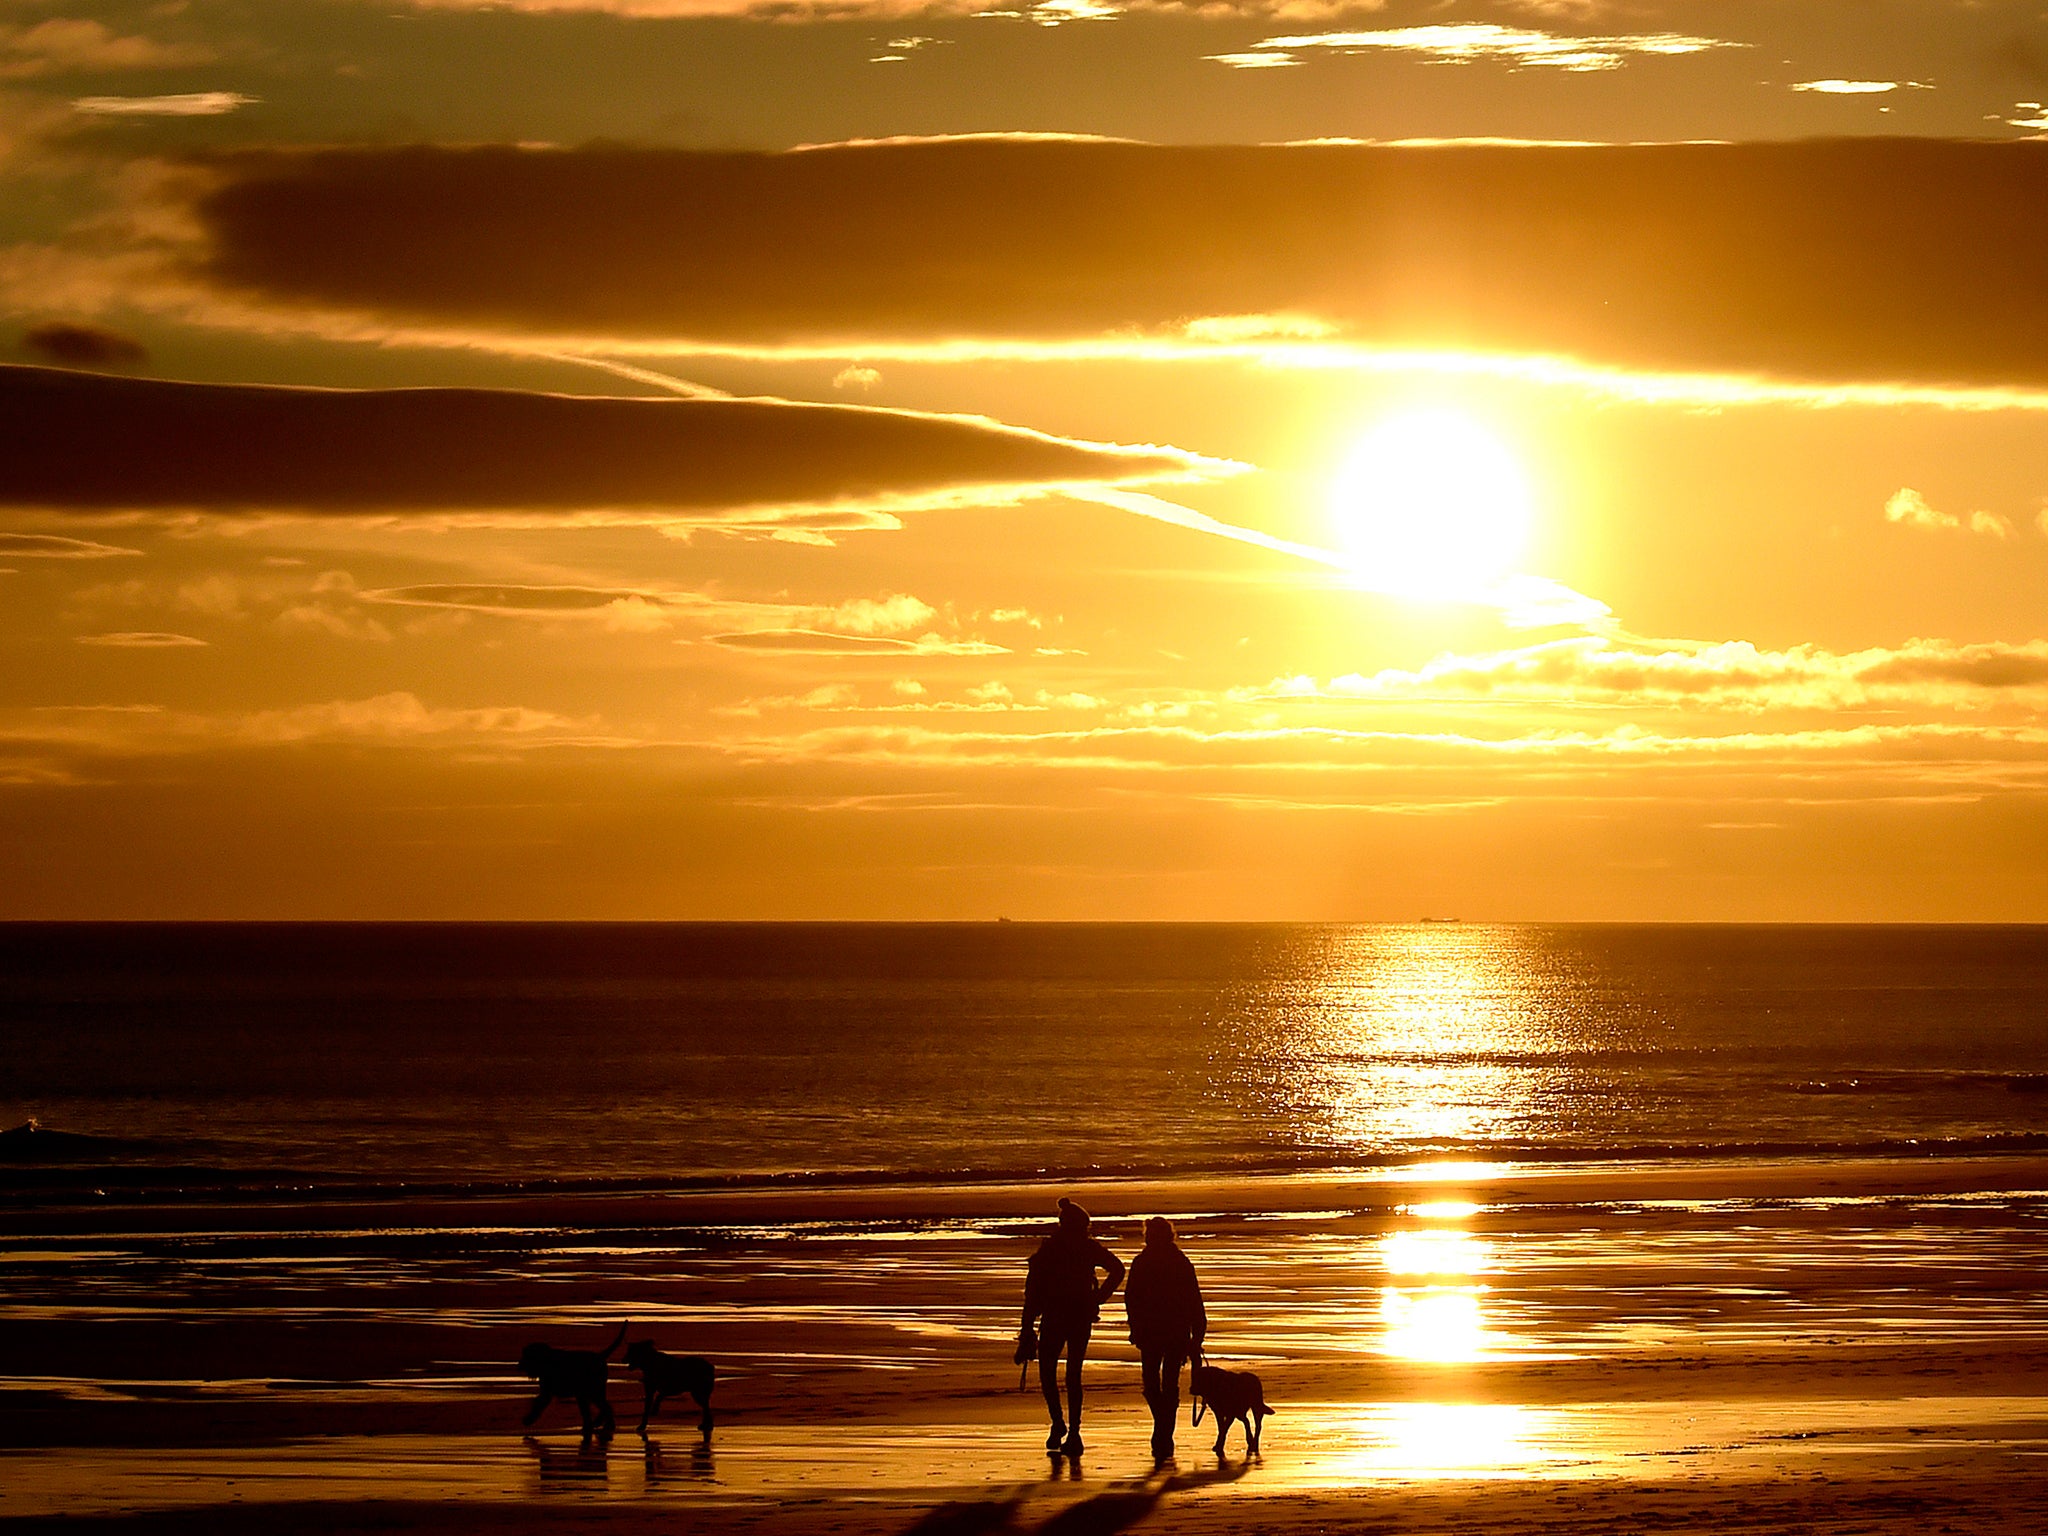 Dog walkers during sunrise on Longsands beach in Tynemouth